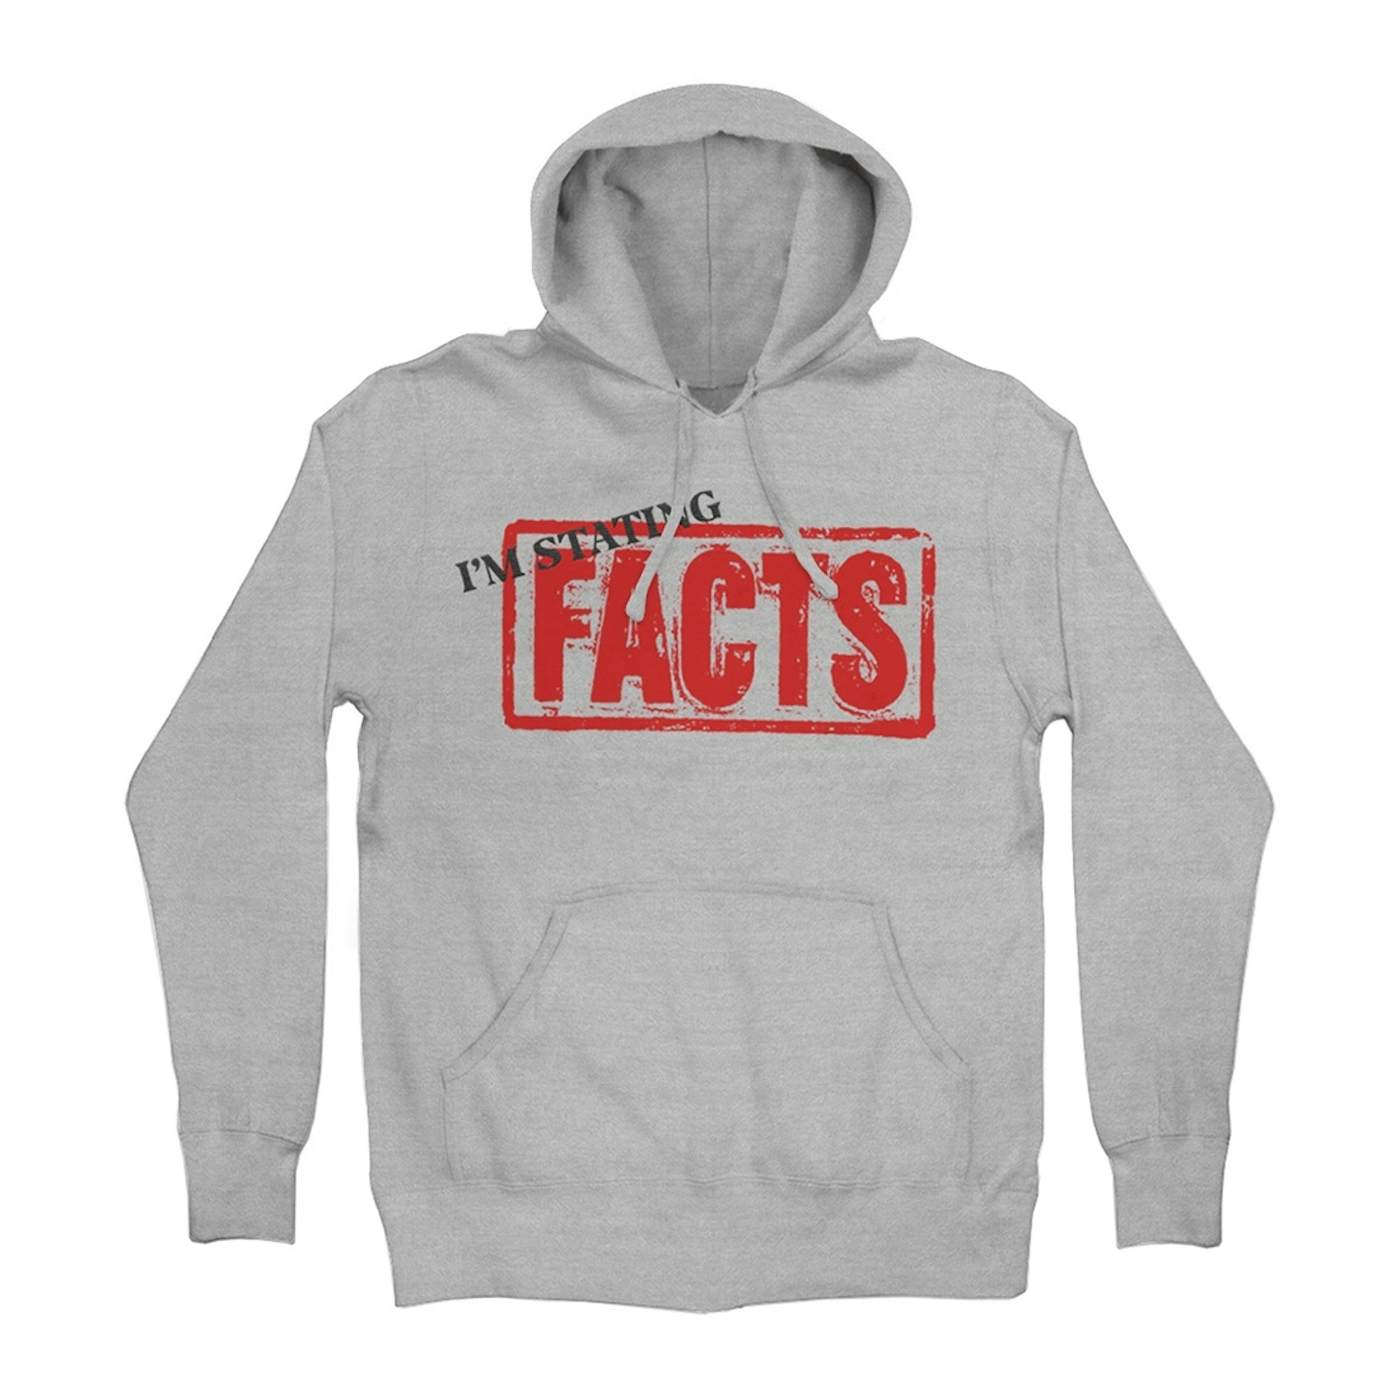 Kevin Gates Facts Stamp Hoodie